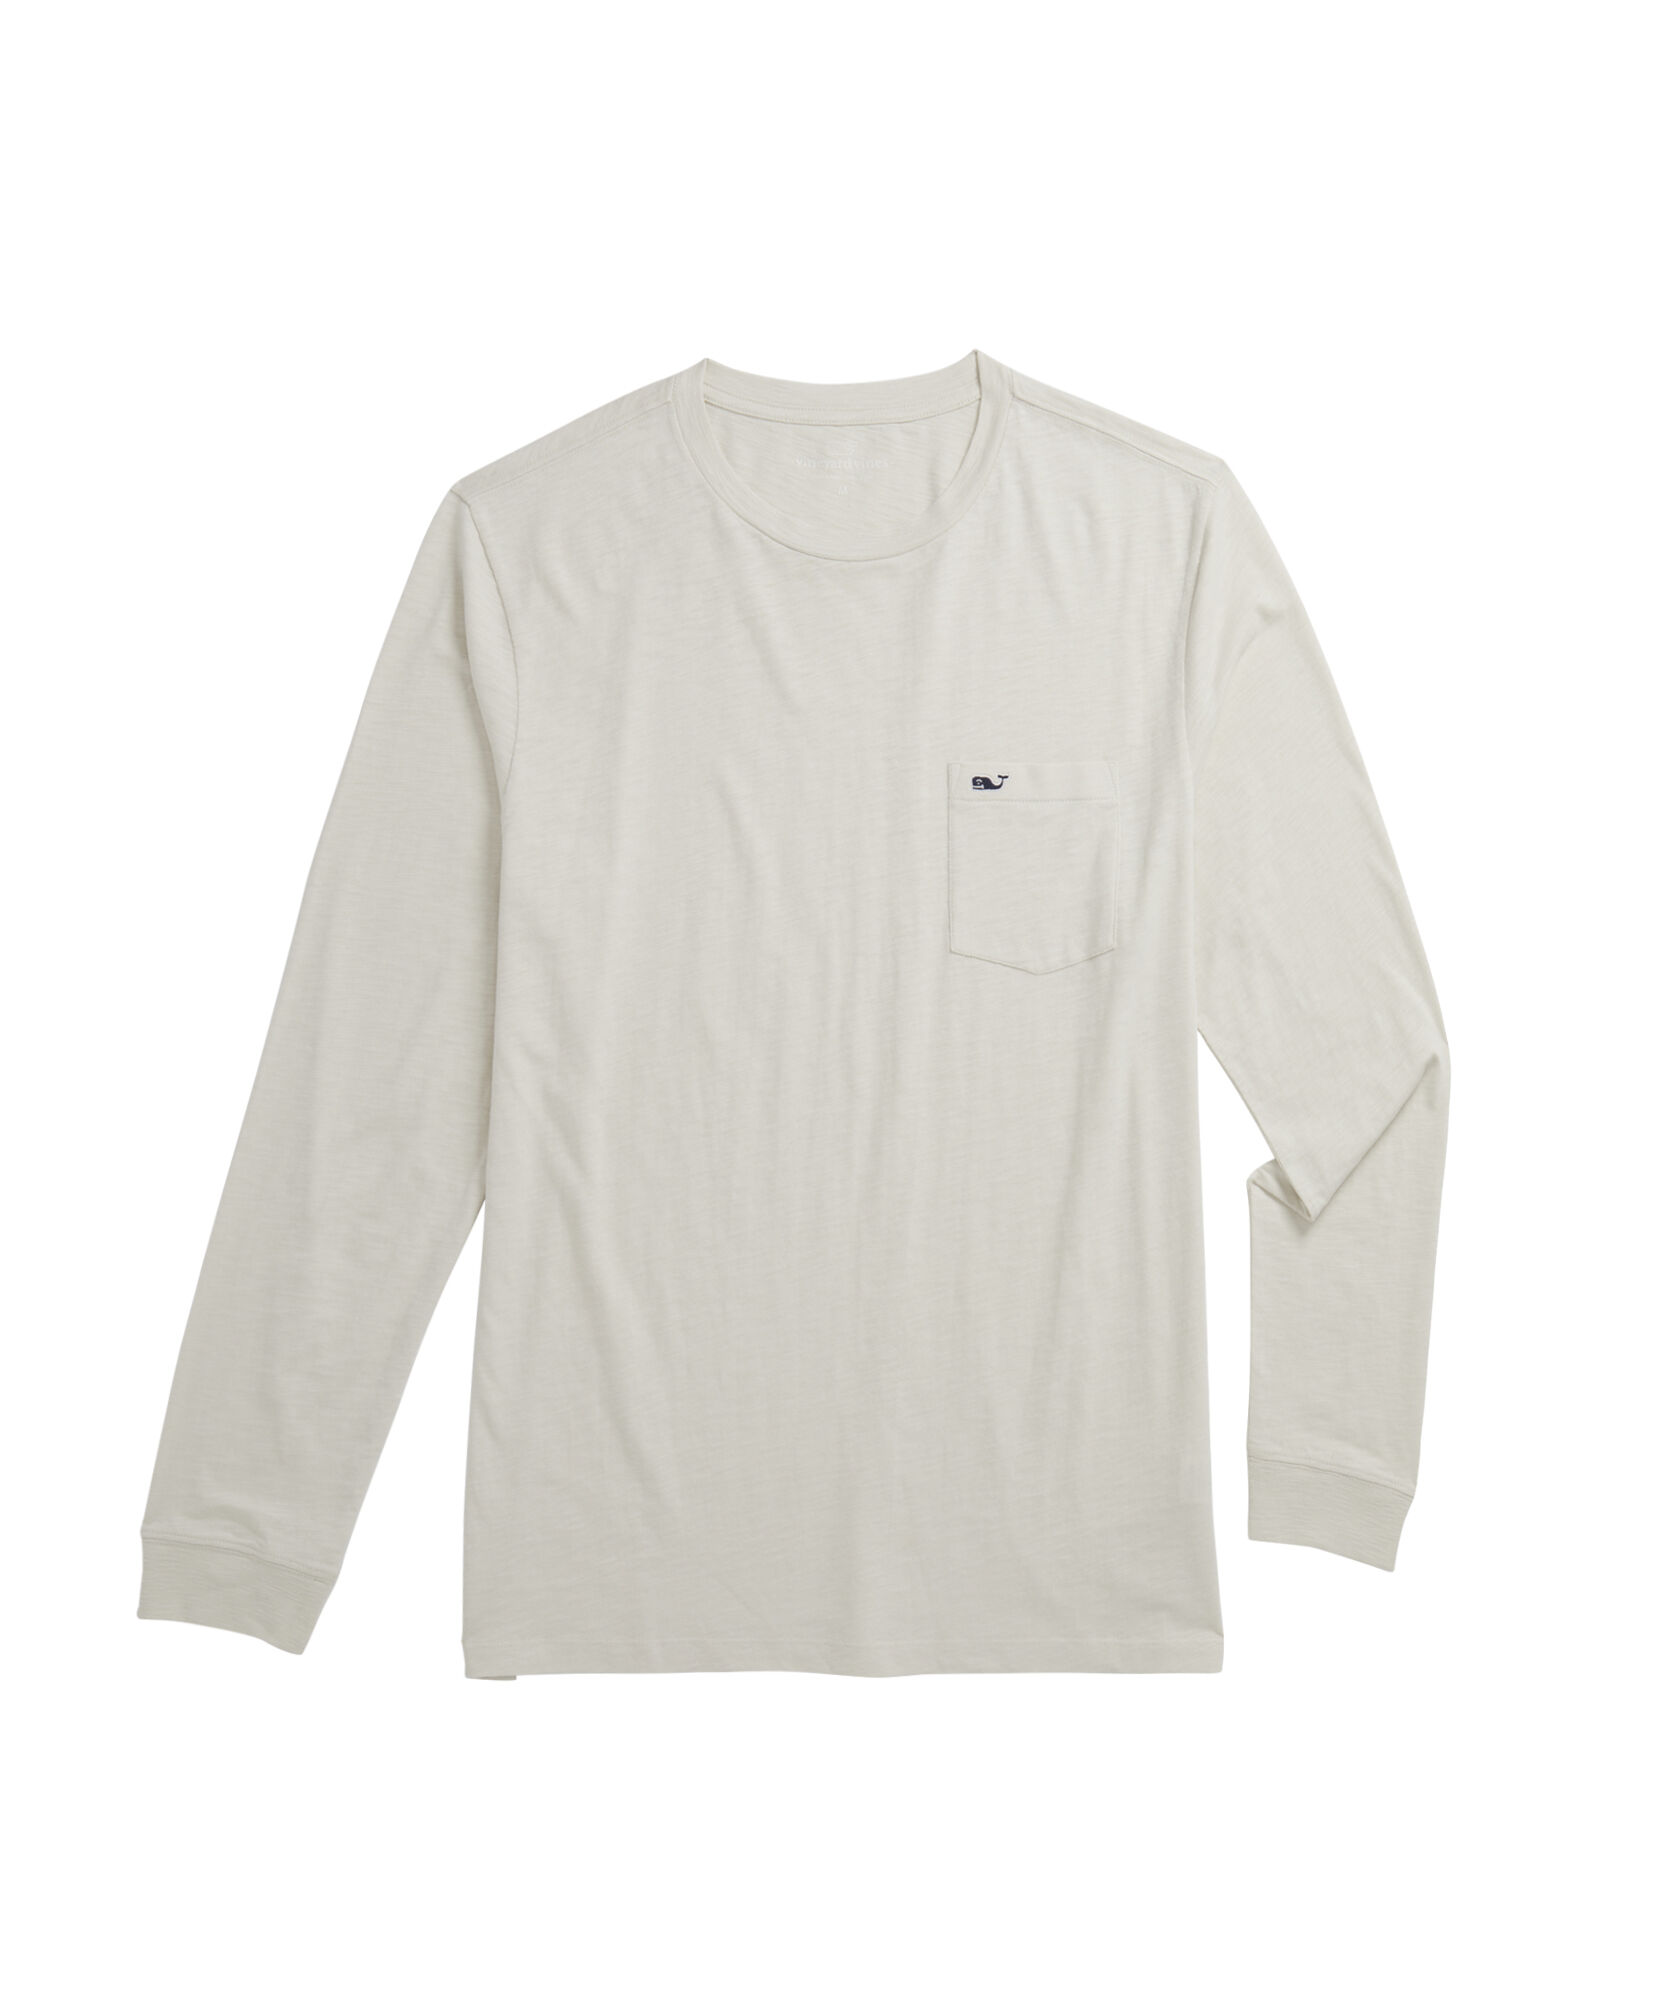 OUTLET Slub Whale Embroidered Long-Sleeve Pocket Tee